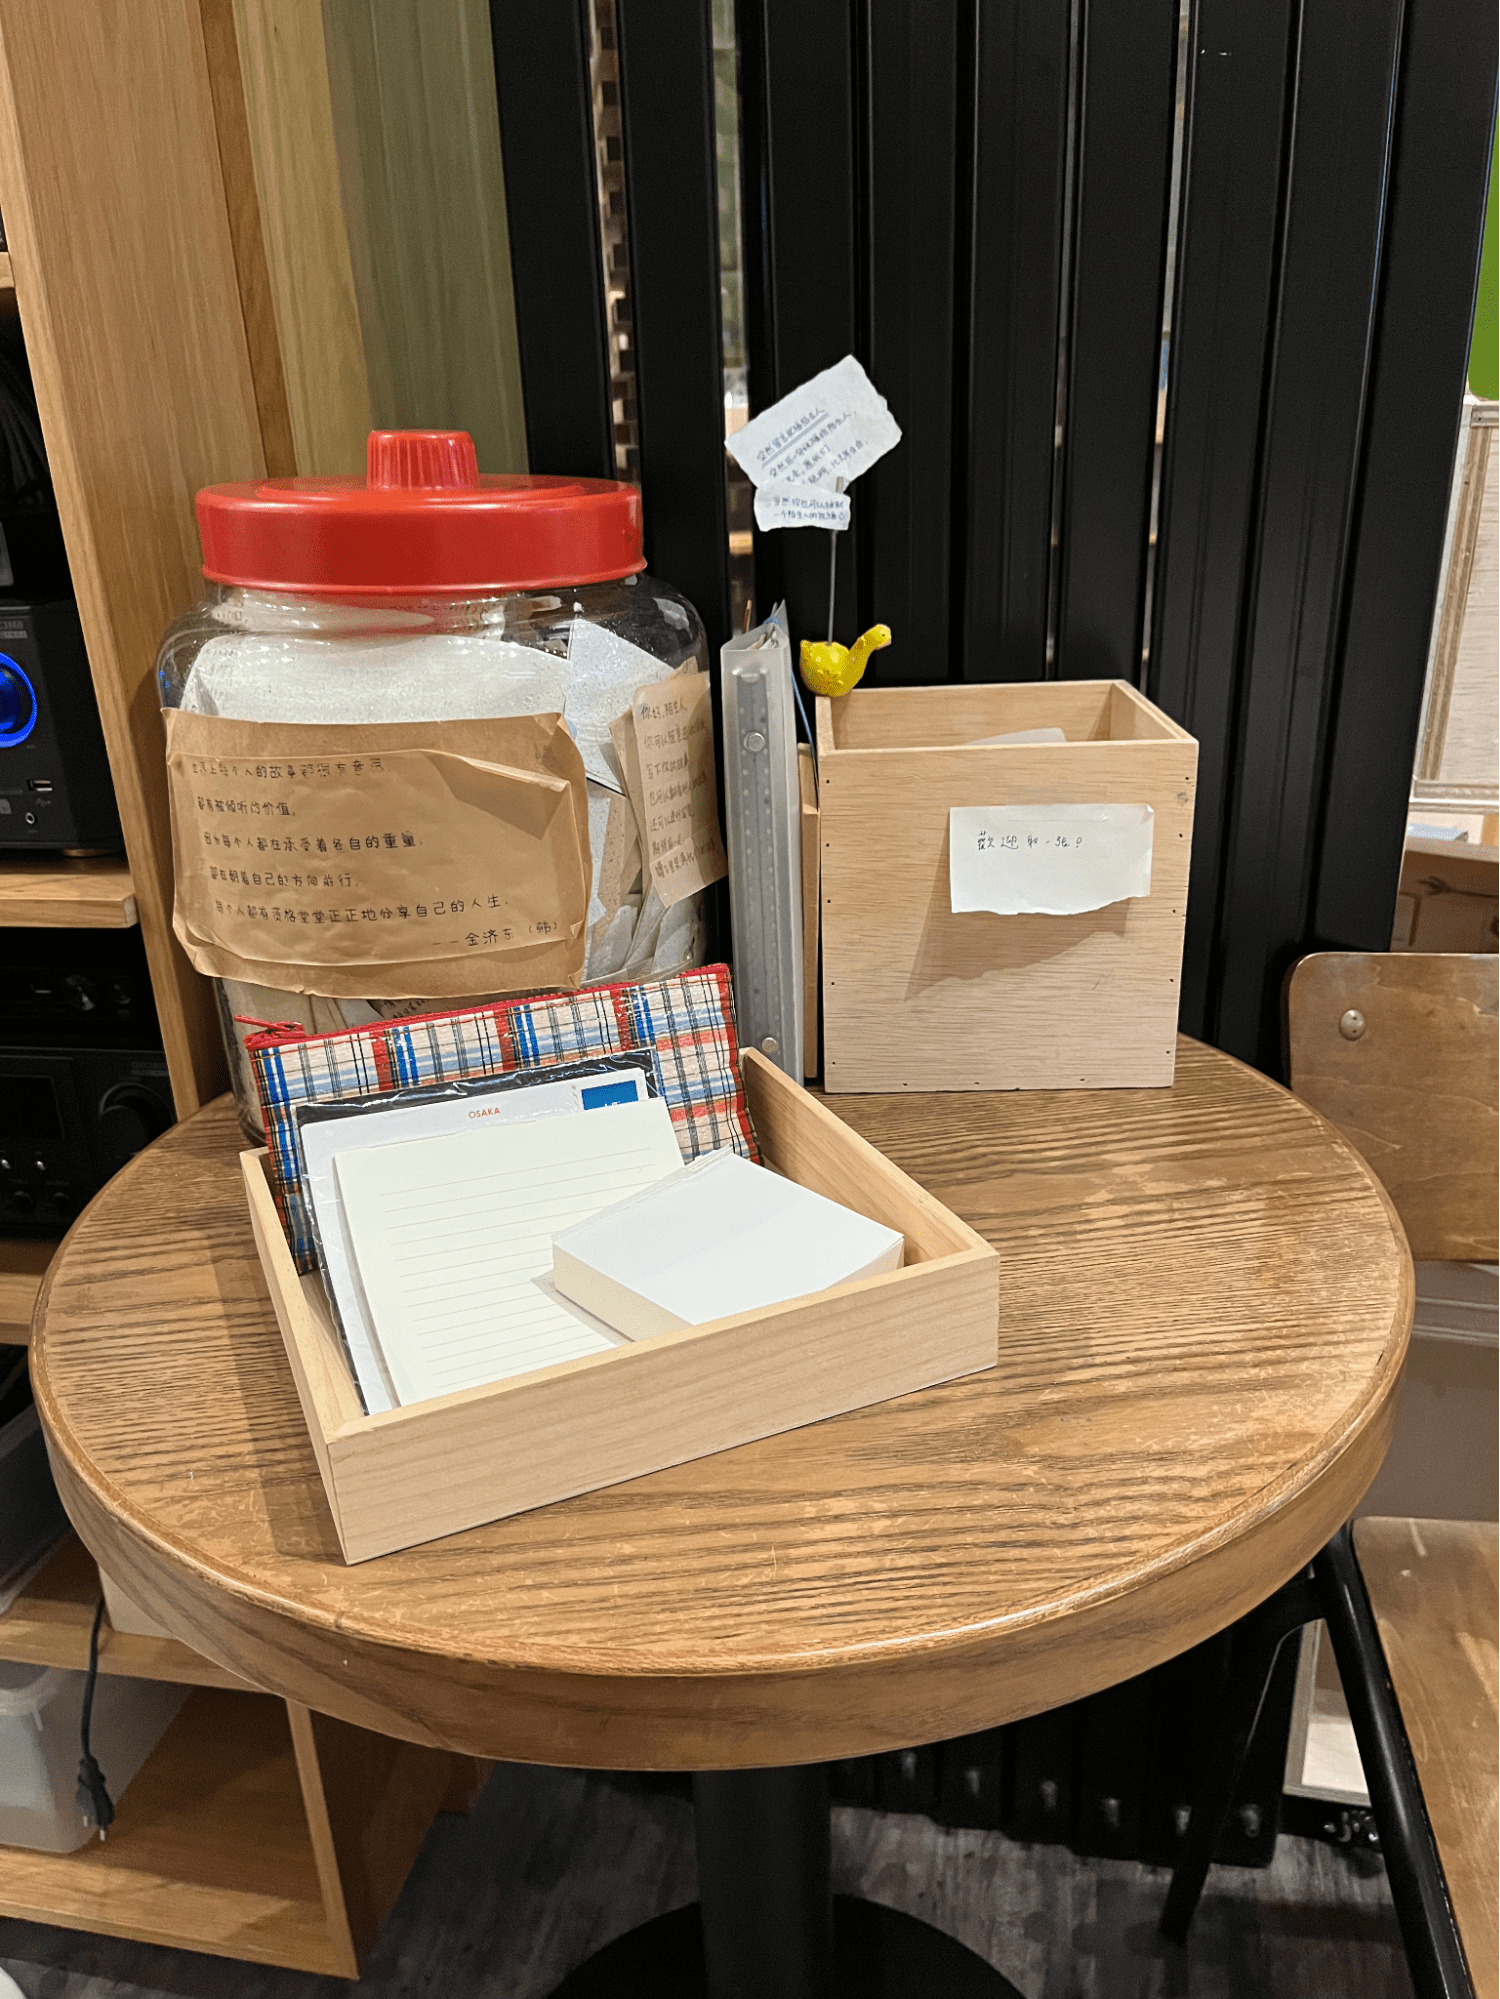 grassroots book room-letter writing station